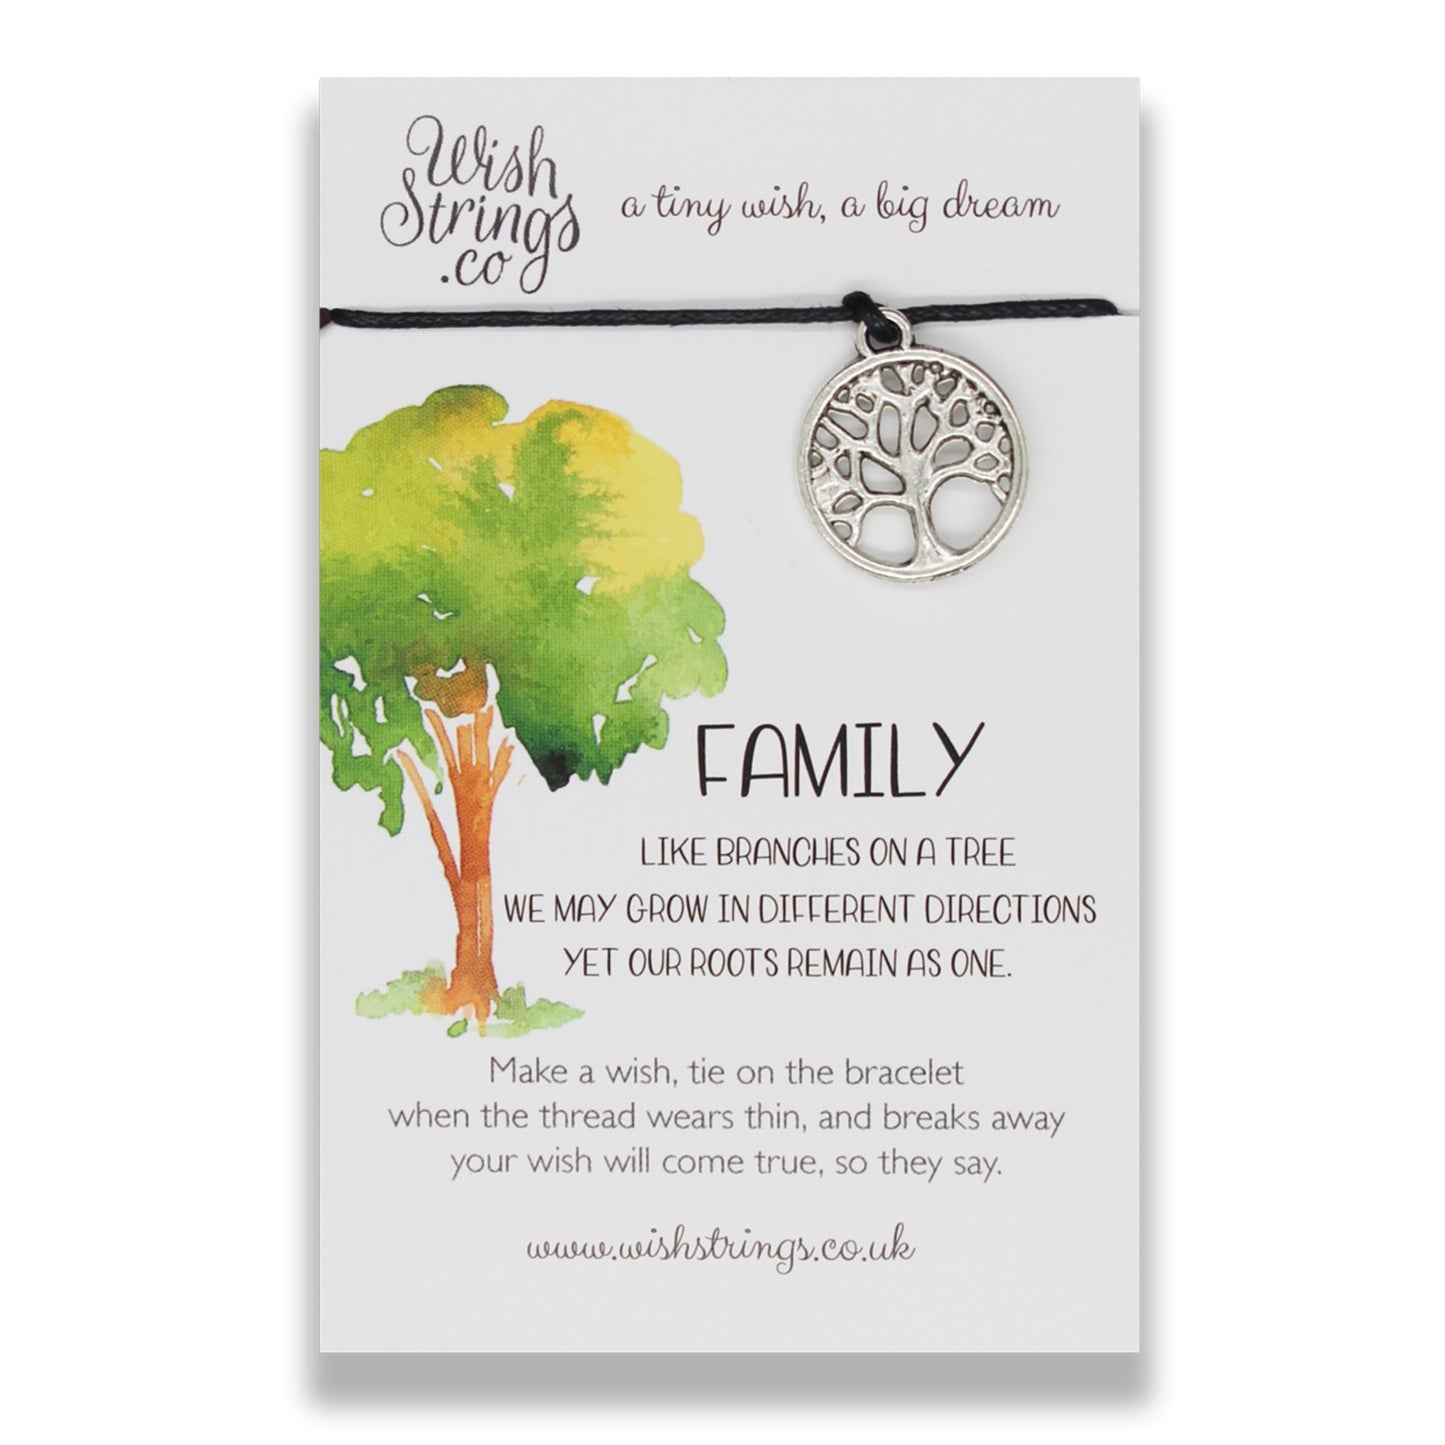 Family Roots As One Wish String Bracelet With Lucky Charm